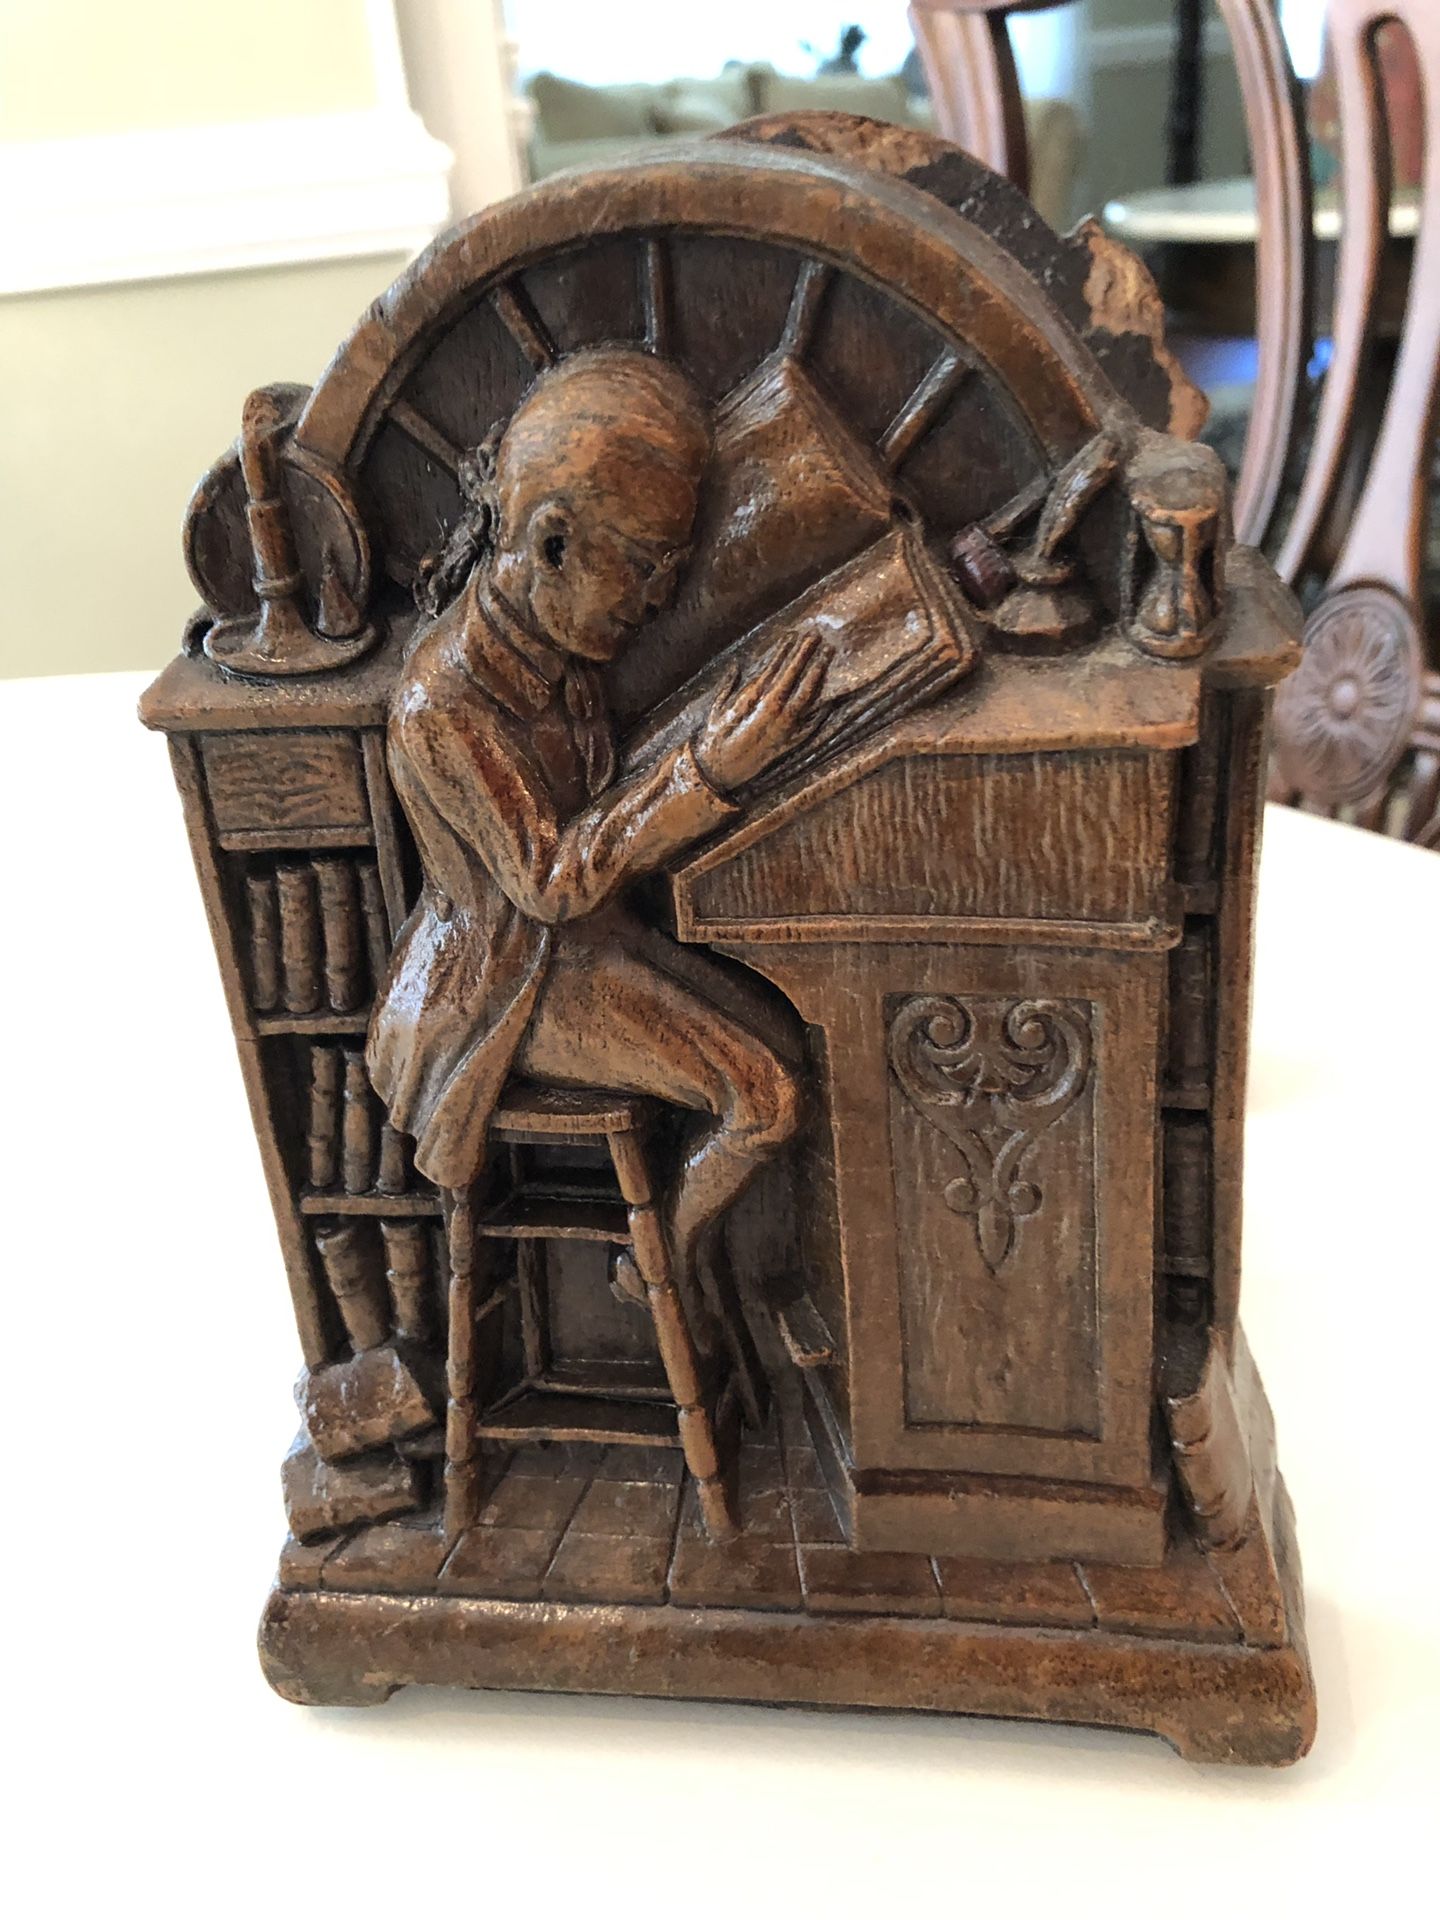 SYROCO WOOD SYRACUSE N.Y. VICTORIAN MAN READING AT LIBRARY DESK BOOKENDS. “1950s”VINTAGE*